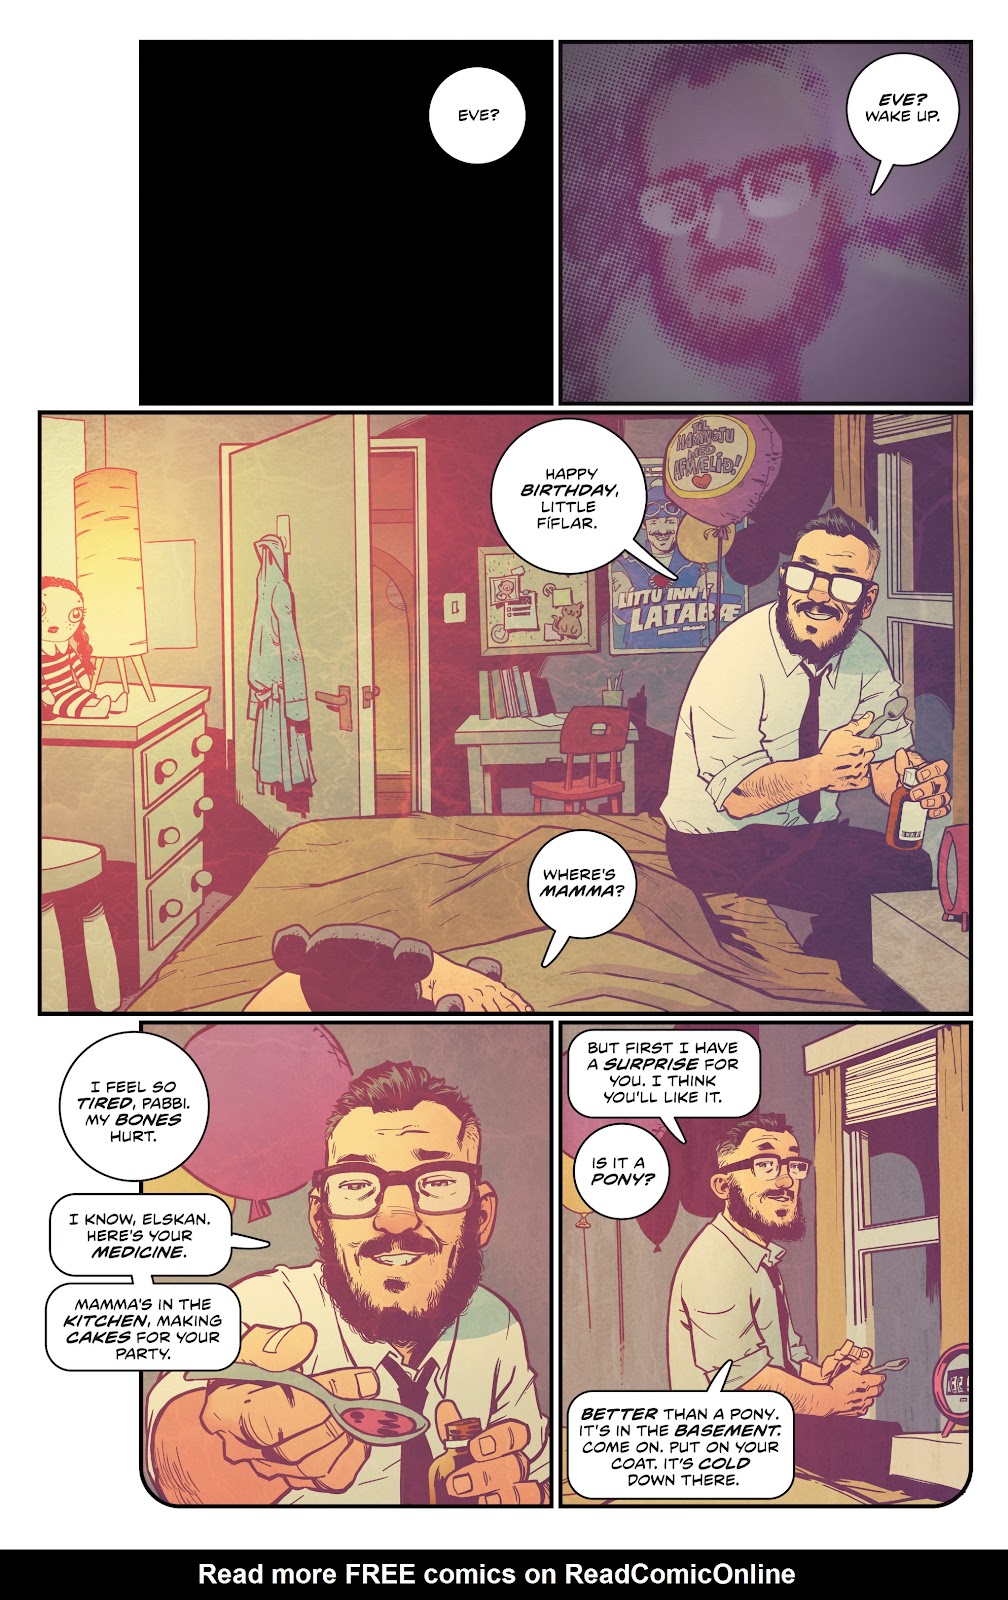 Eve Stranger issue 1 - Page 3